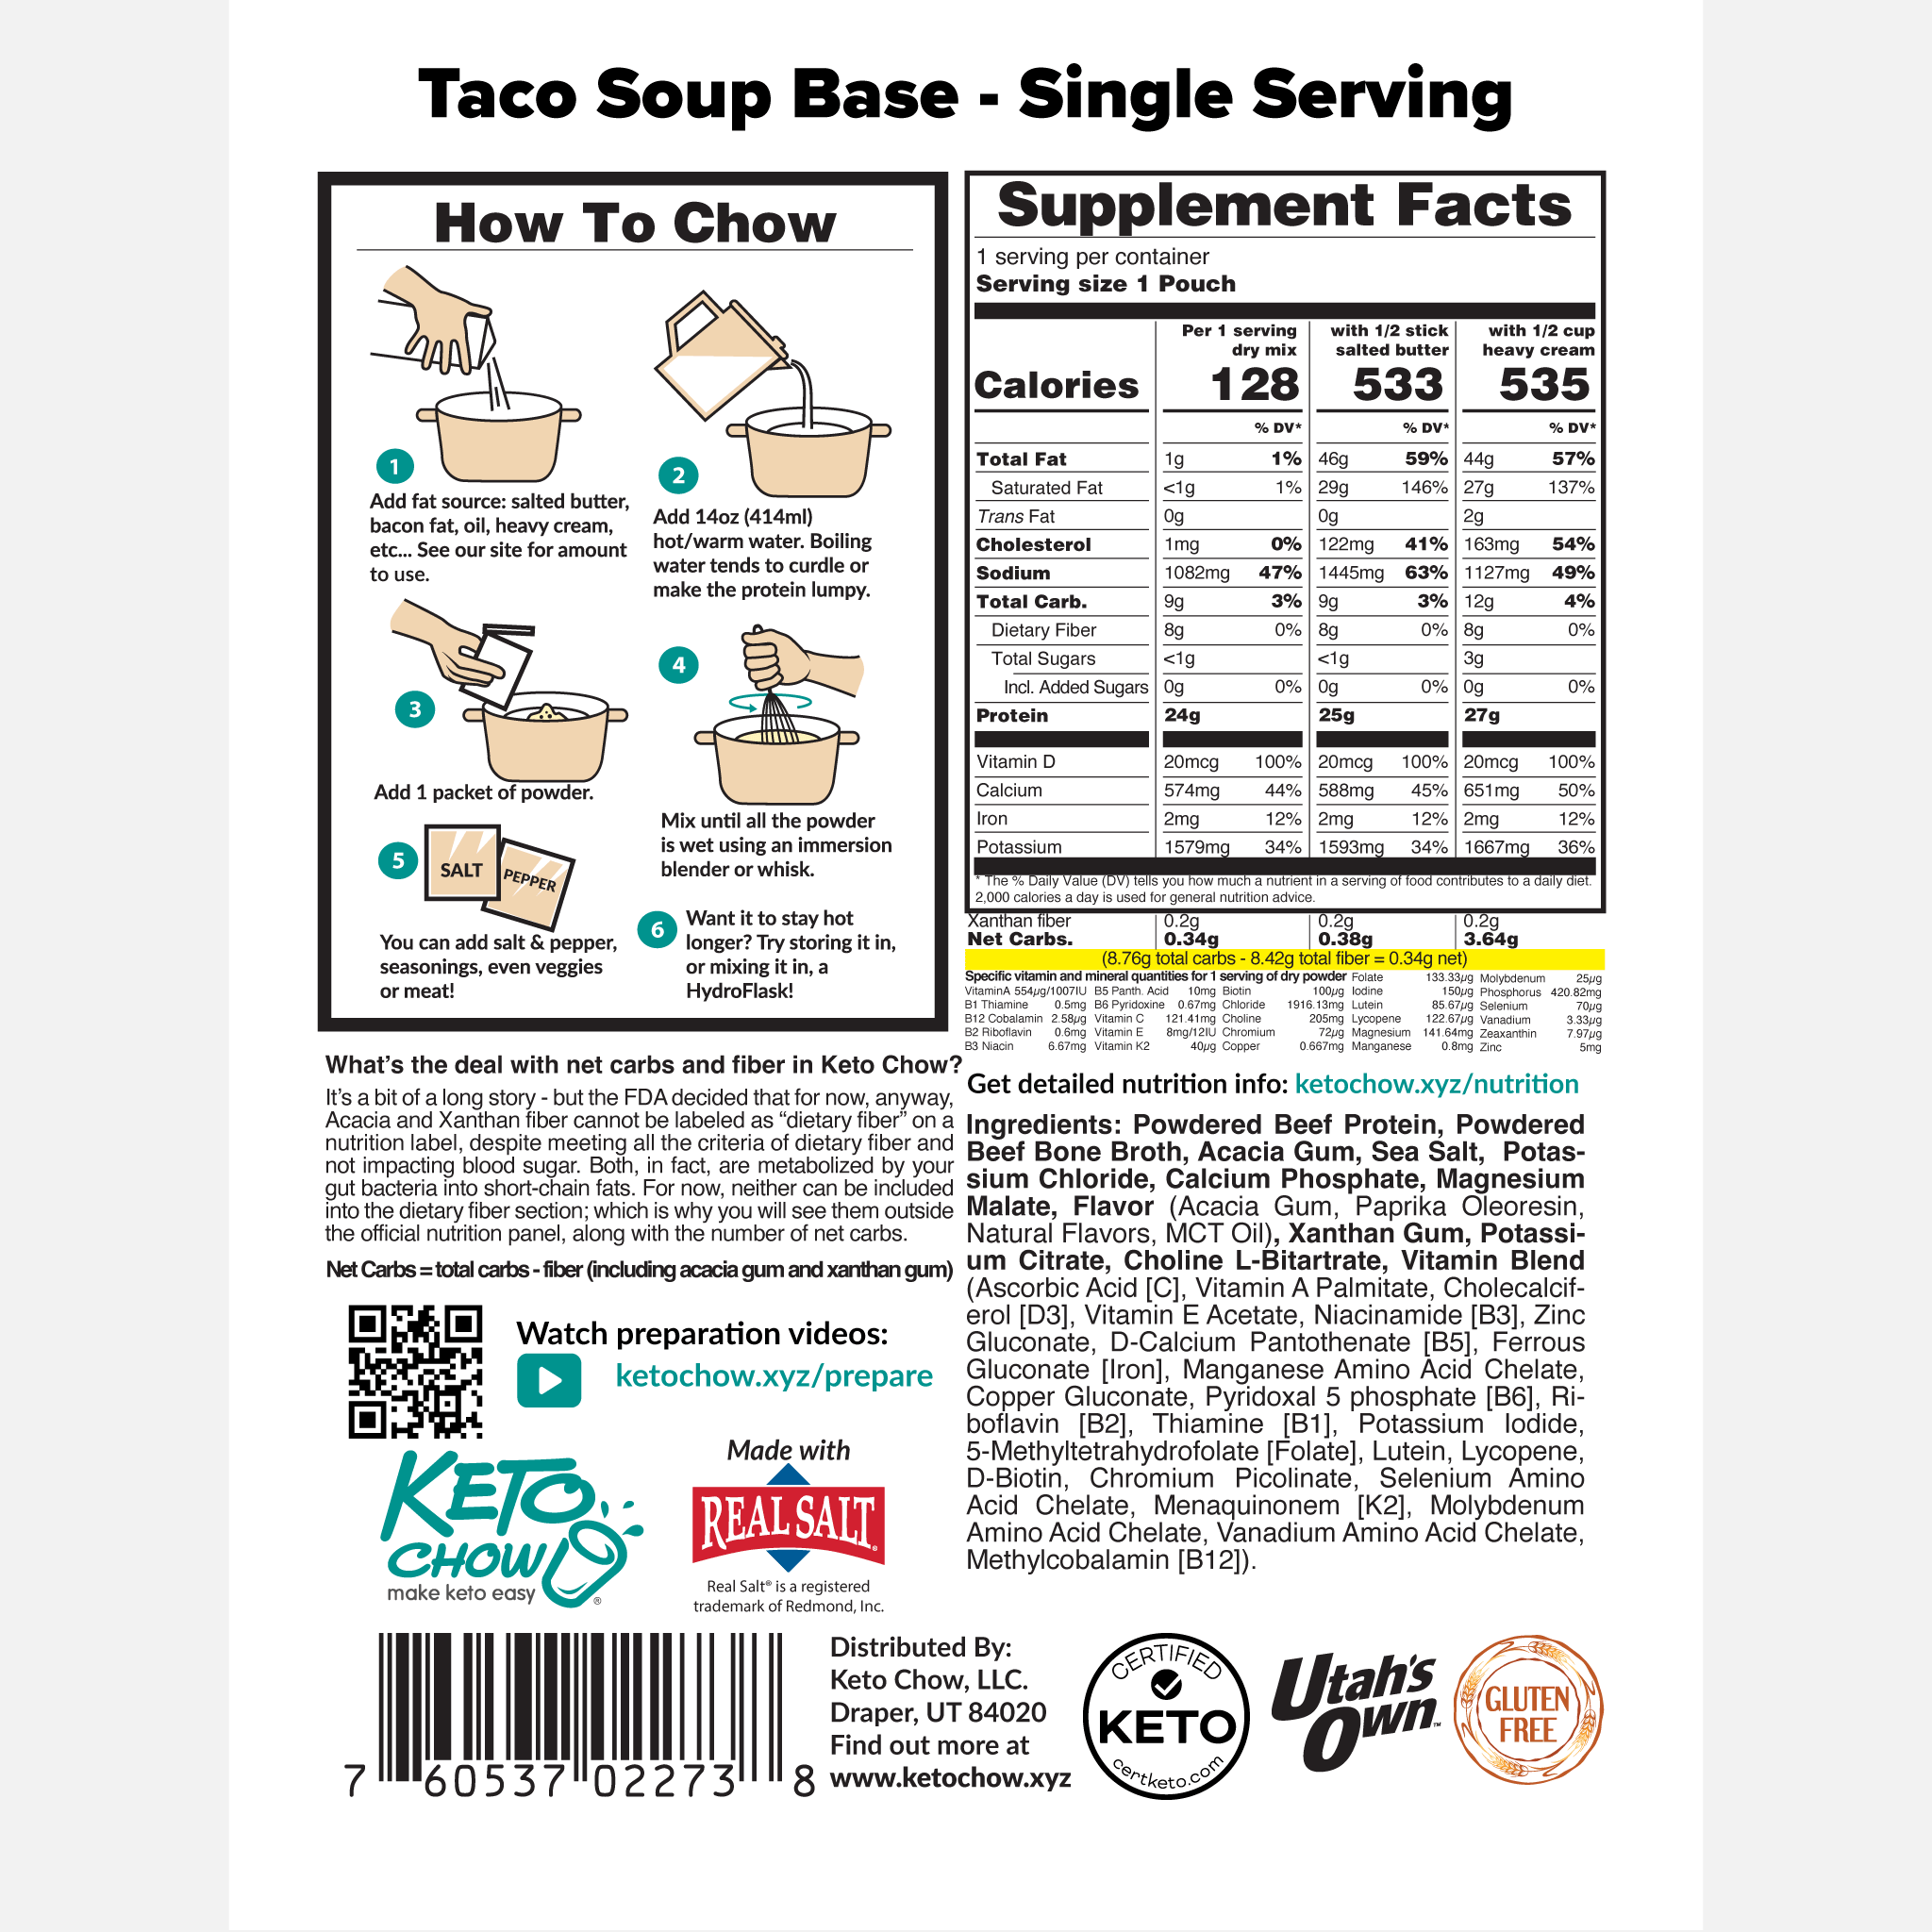 Spicy Taco Soup Keto Chow package back